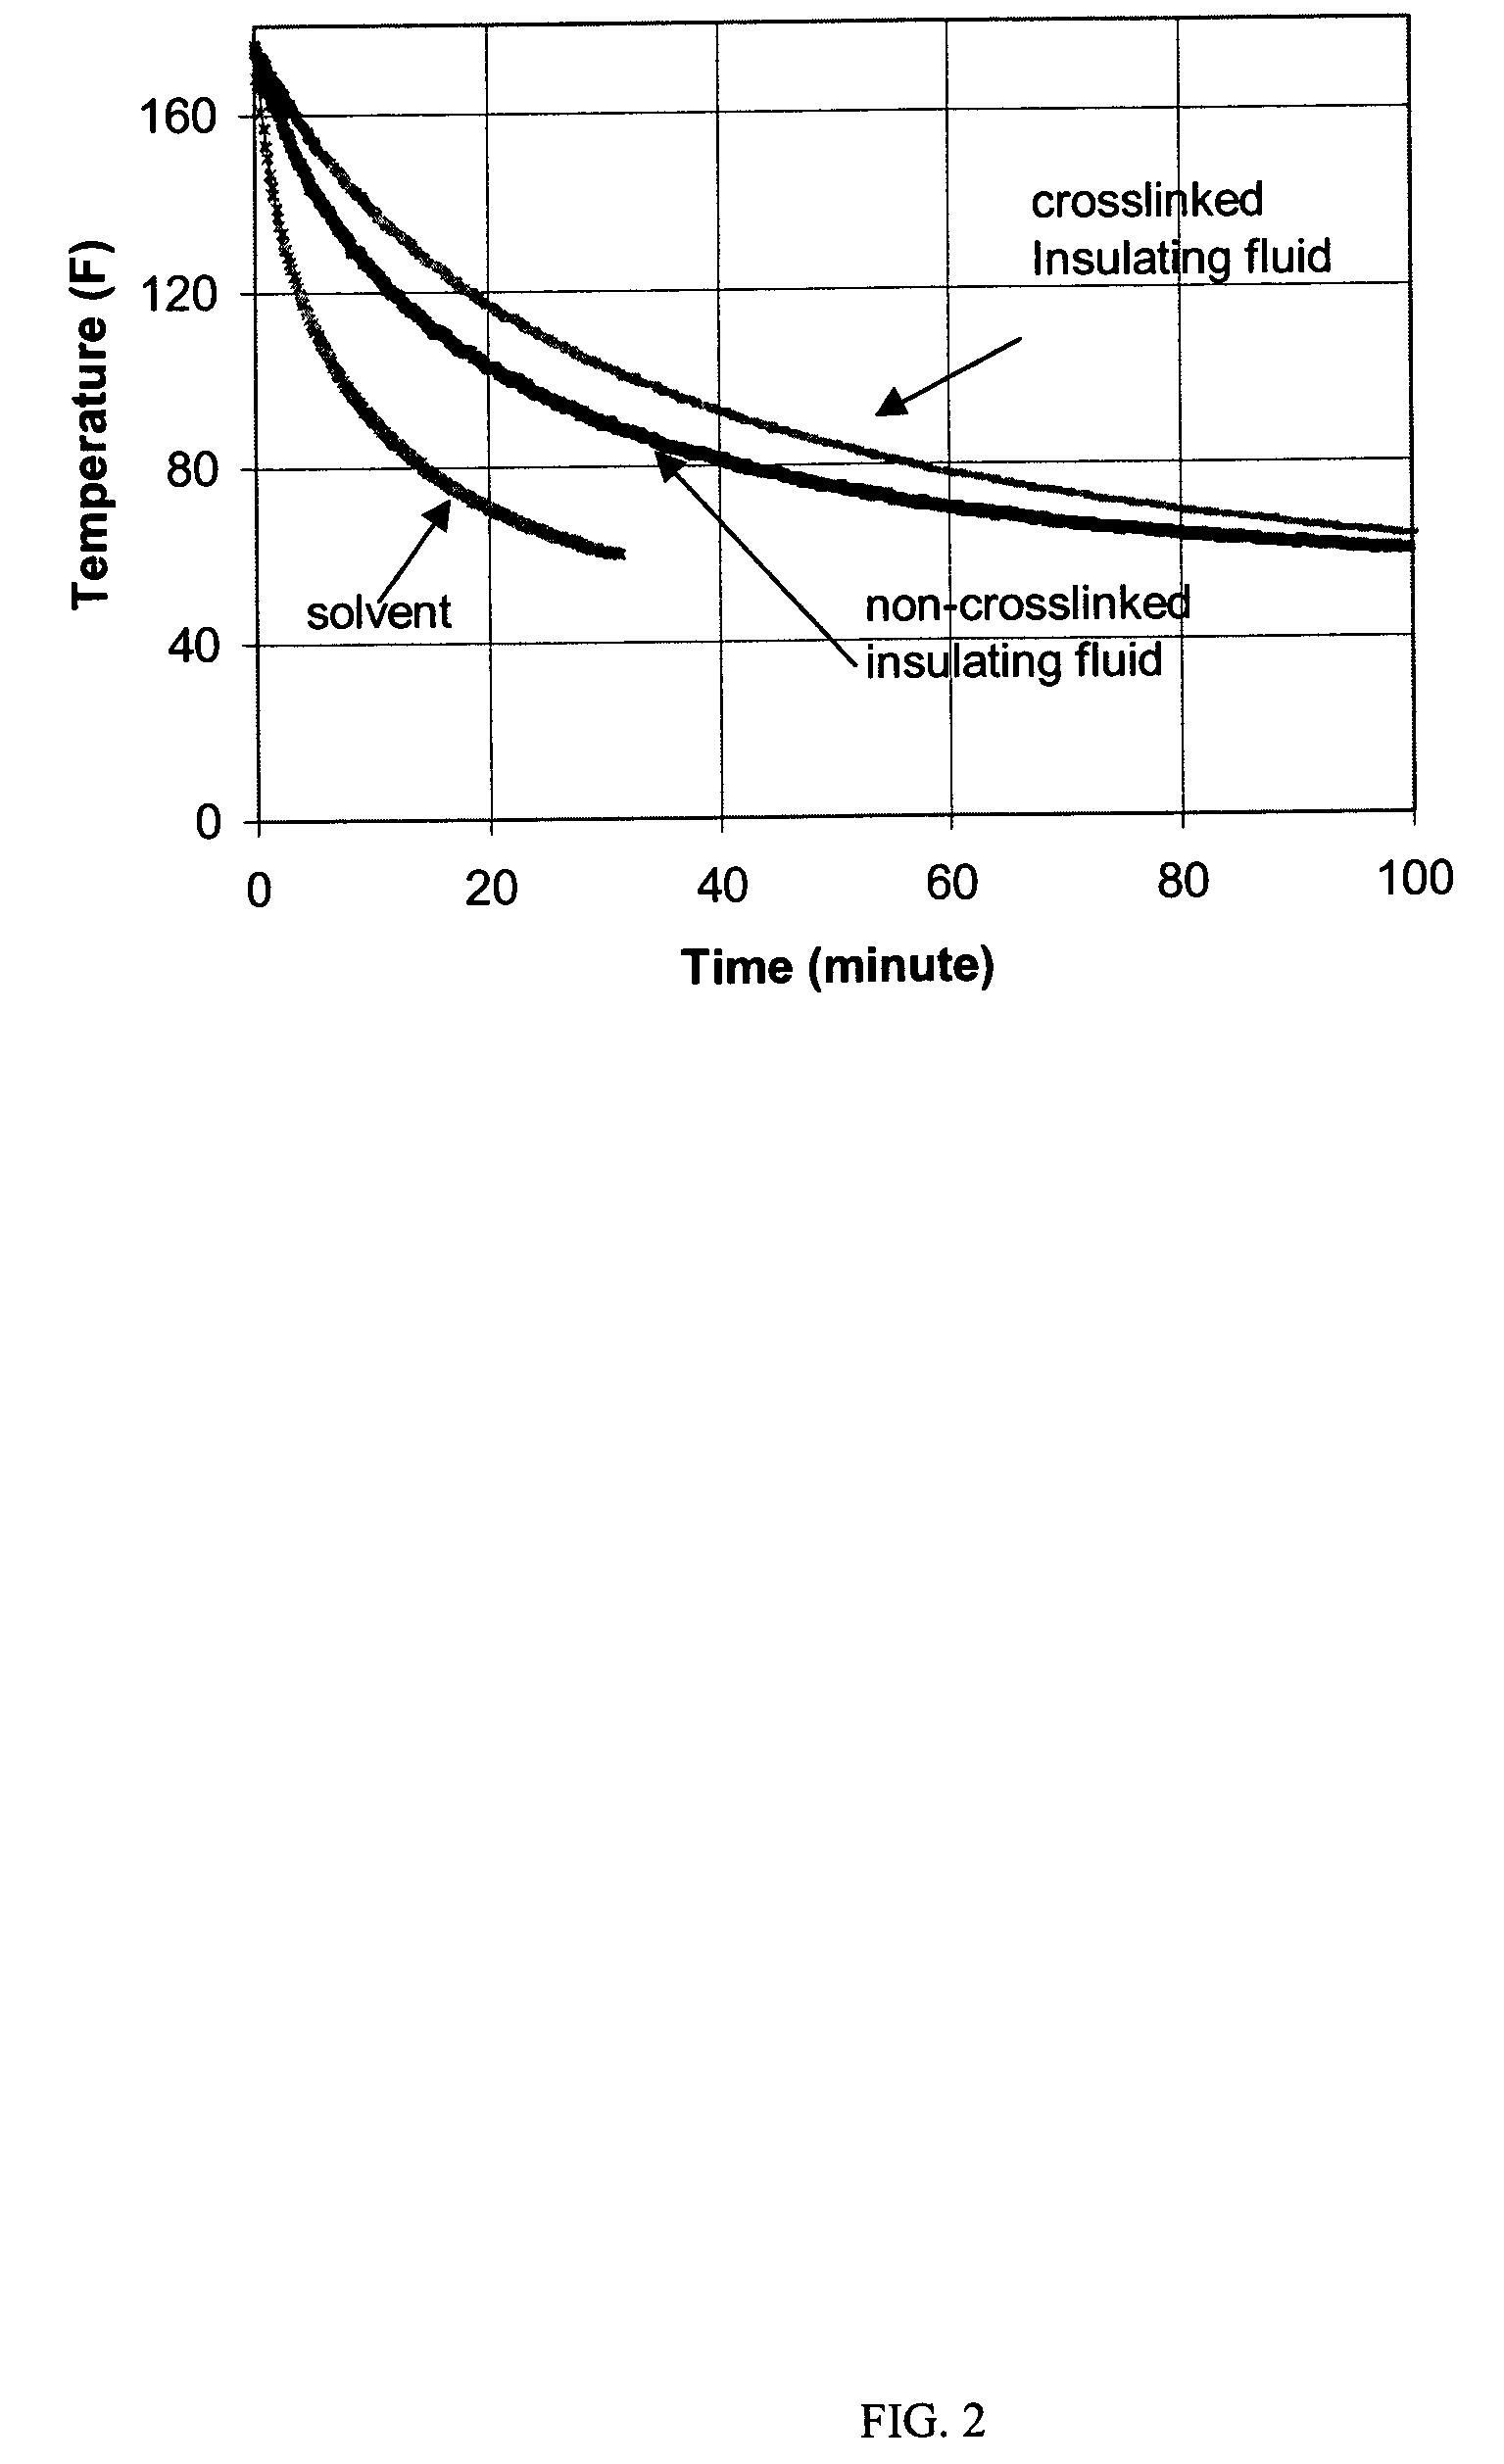 Crosslinkable thermal insulating compositions and methods of using the same